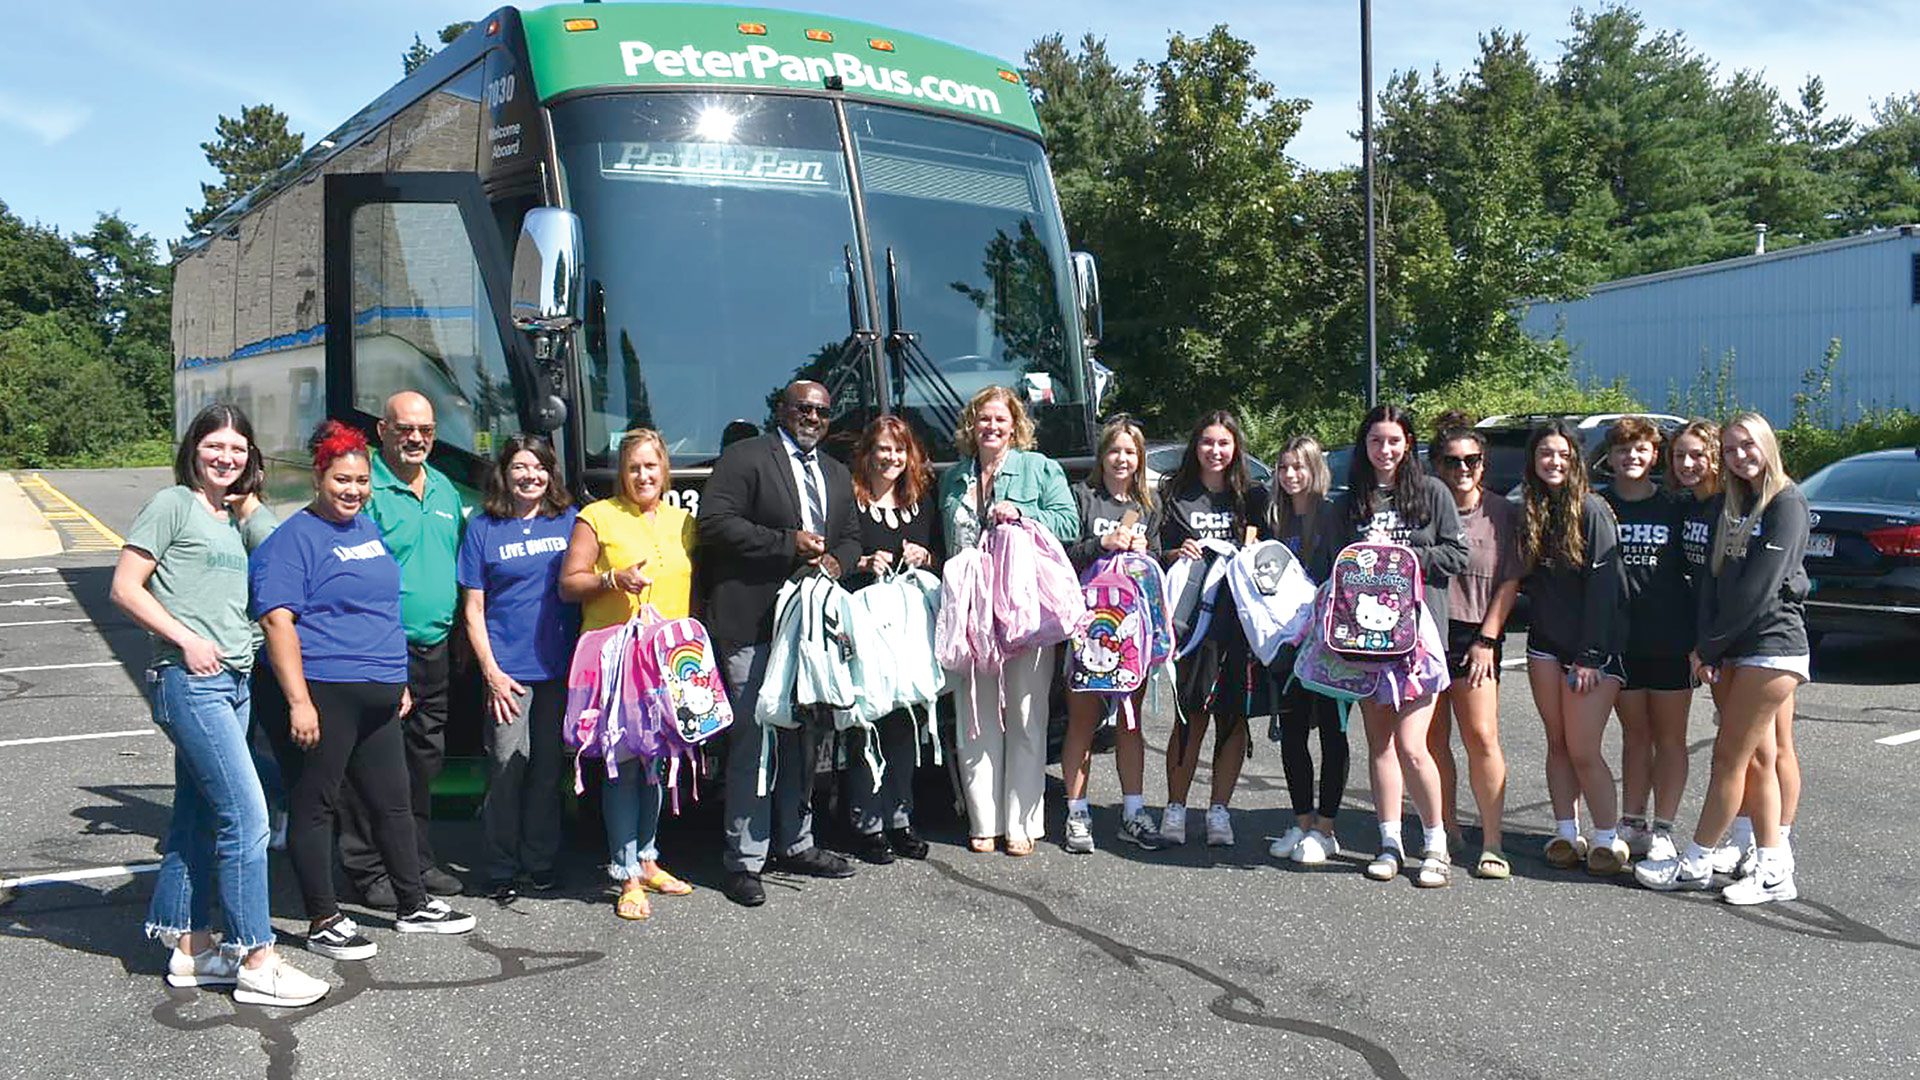 With the Peter Pan bus fully packed, United Way staff and volunteers climbed aboard and trekked through 10 school districts to drop off more than 600 backpacks for students experiencing homelessness